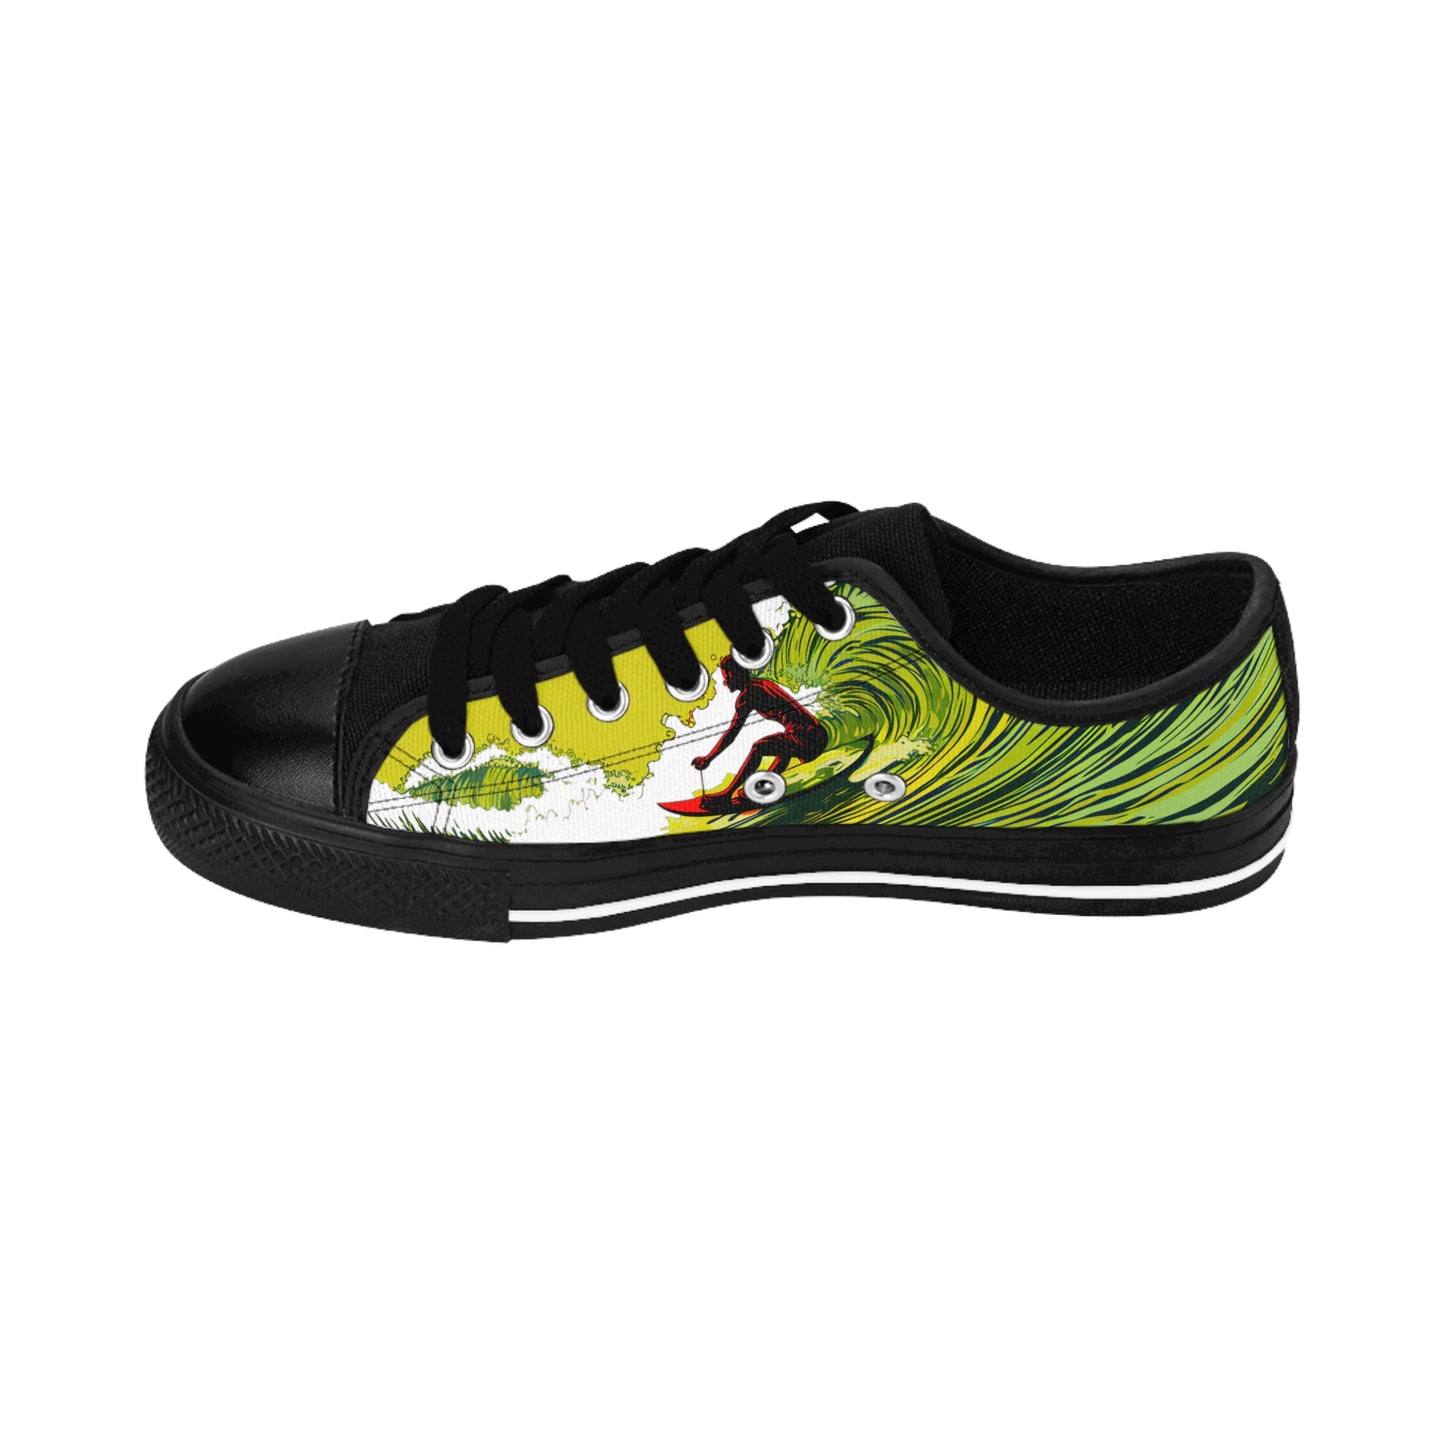 Ride the wave of fashion with our Surfing Wave Green Yellow Red Custom Men's Sneakers. Exclusively produced by Stashbox.ai, these sneakers offer comfort, style, and durability. Make a statement with every step!